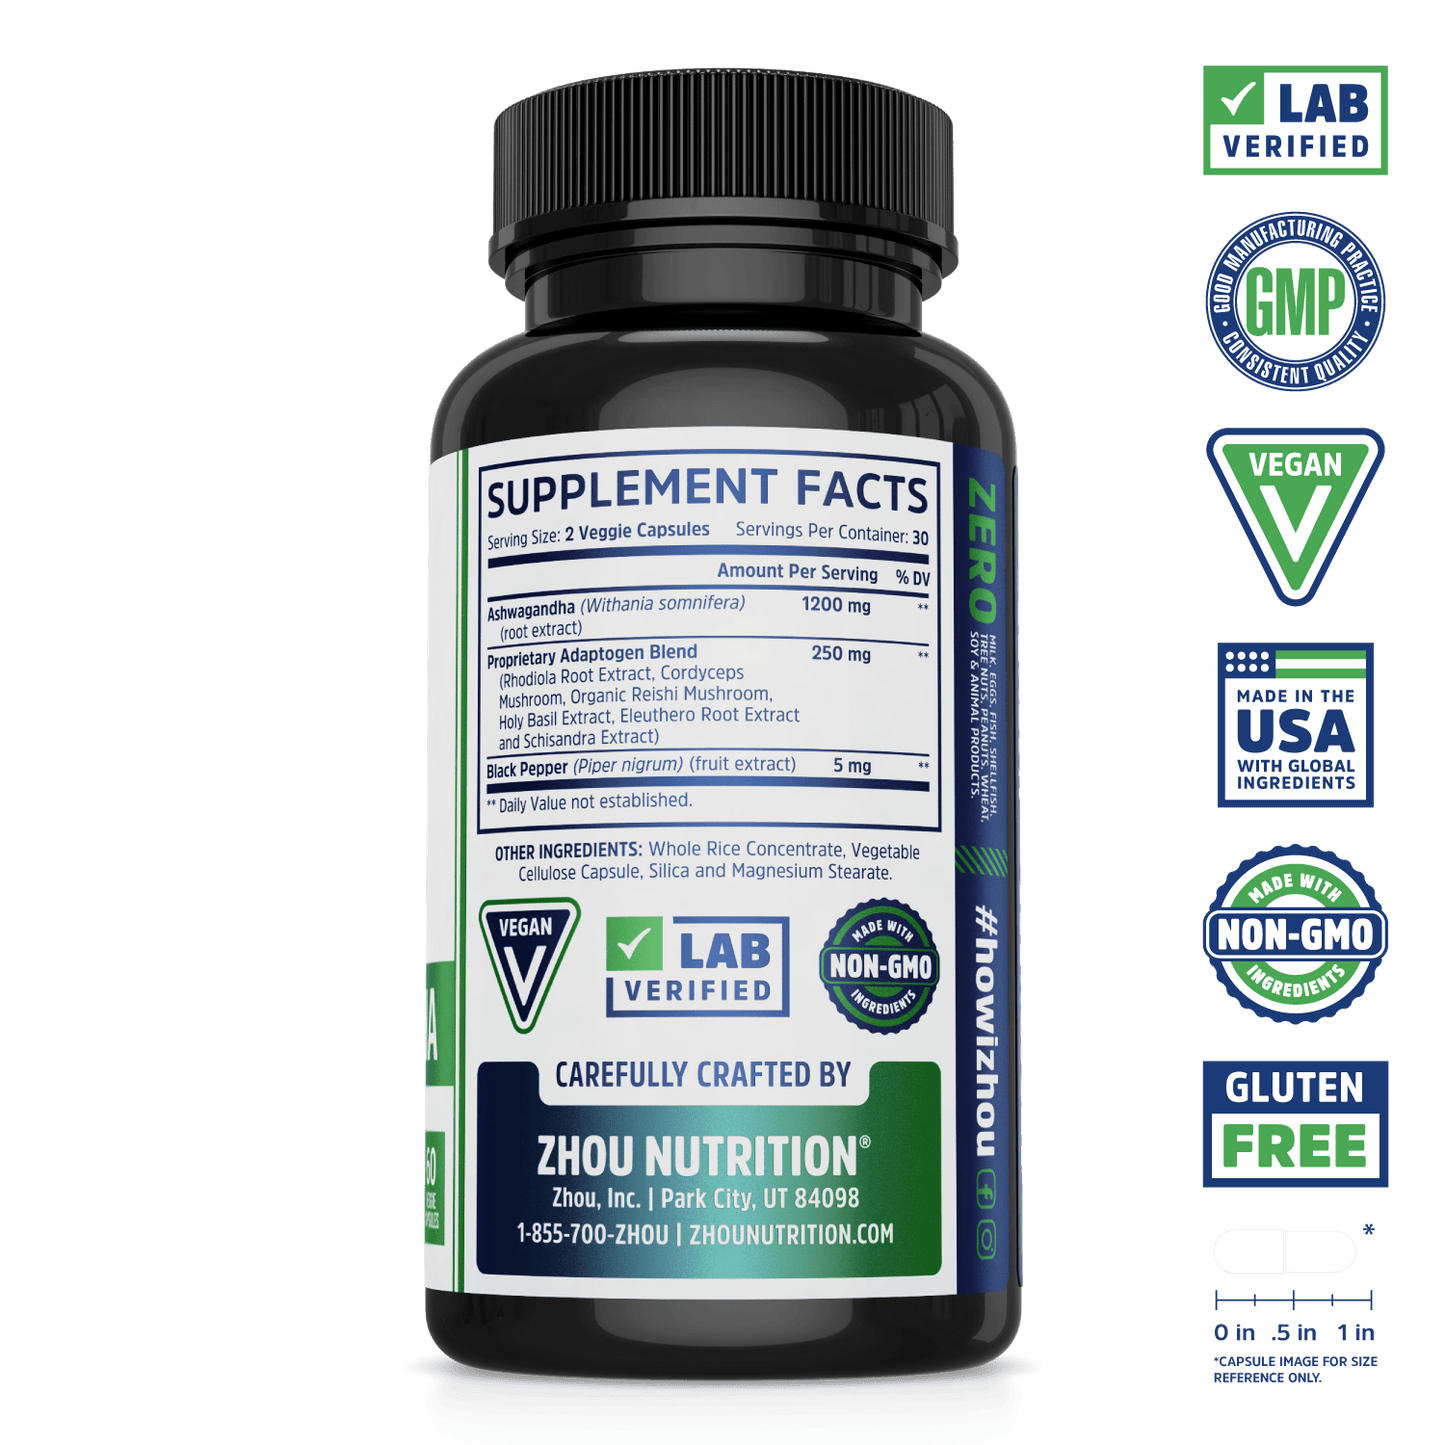 Max Strength Ashwagandha Blend Zhou Nutrition. Bottle side. Lab verified, good manufacturing practices, vegan, made with non-GMO ingredients, made in the USA with global ingredients, gluten free.